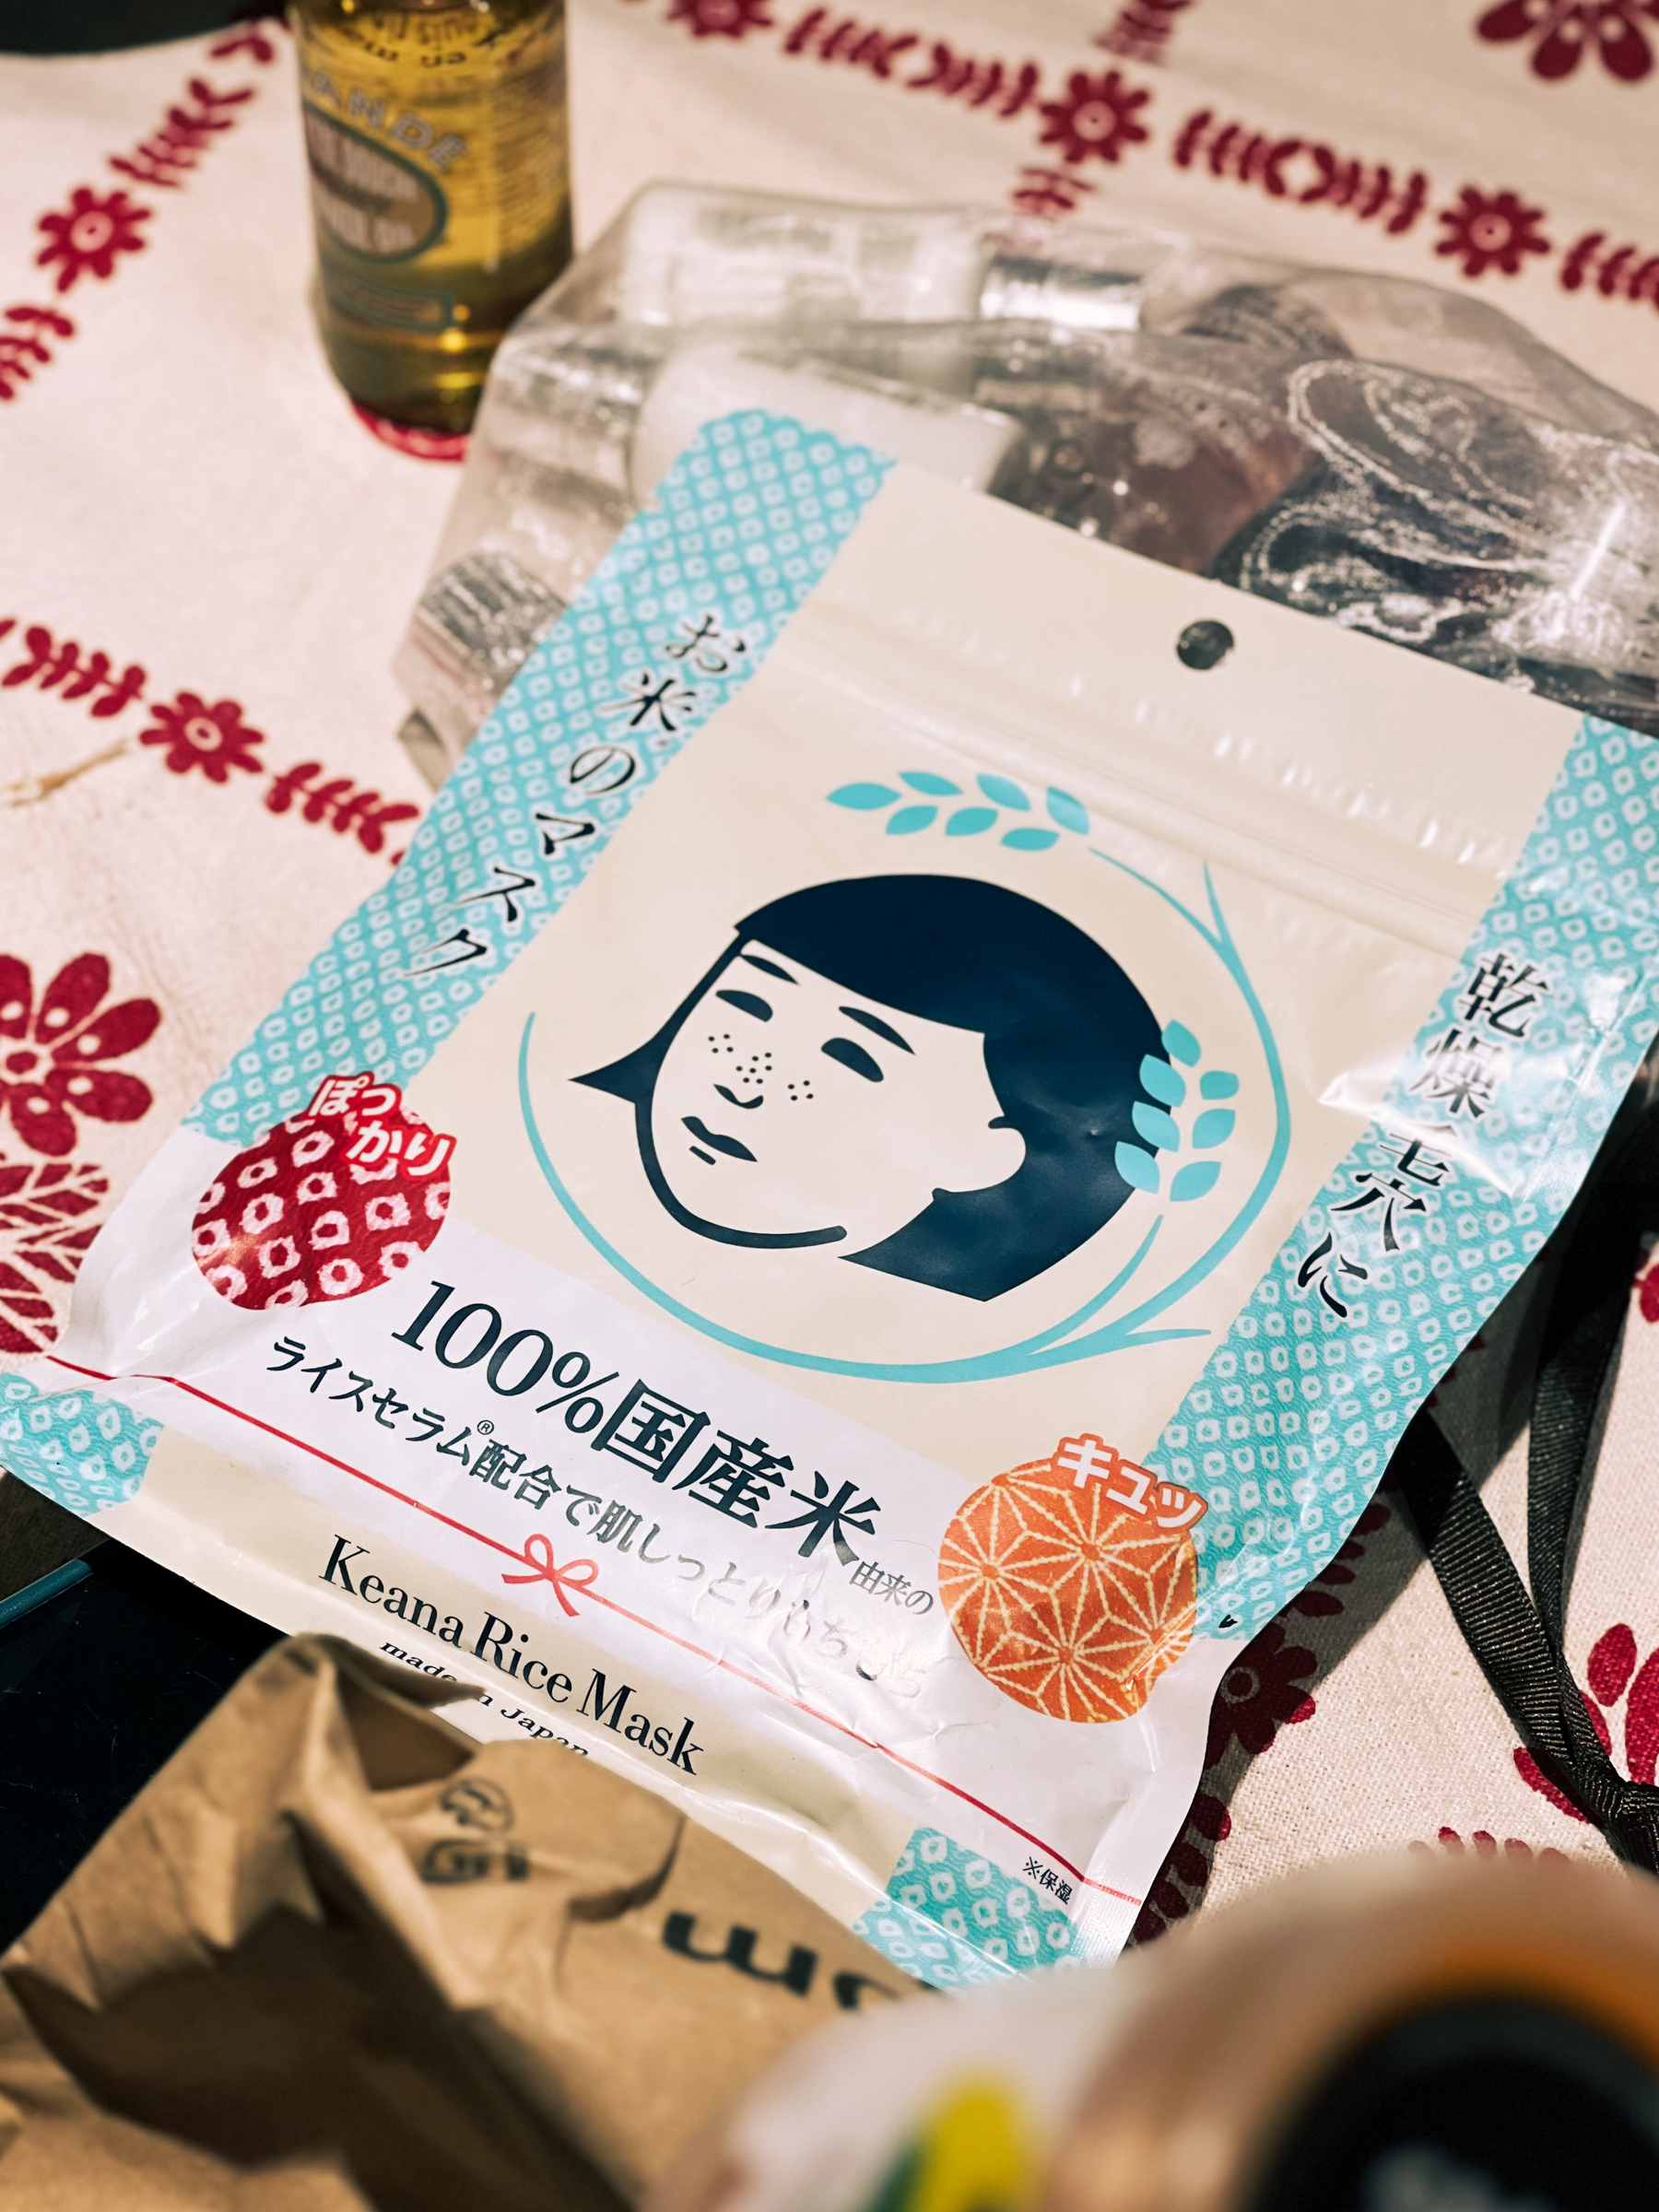 A package of Keana Rice Mask on a patterned cloth.